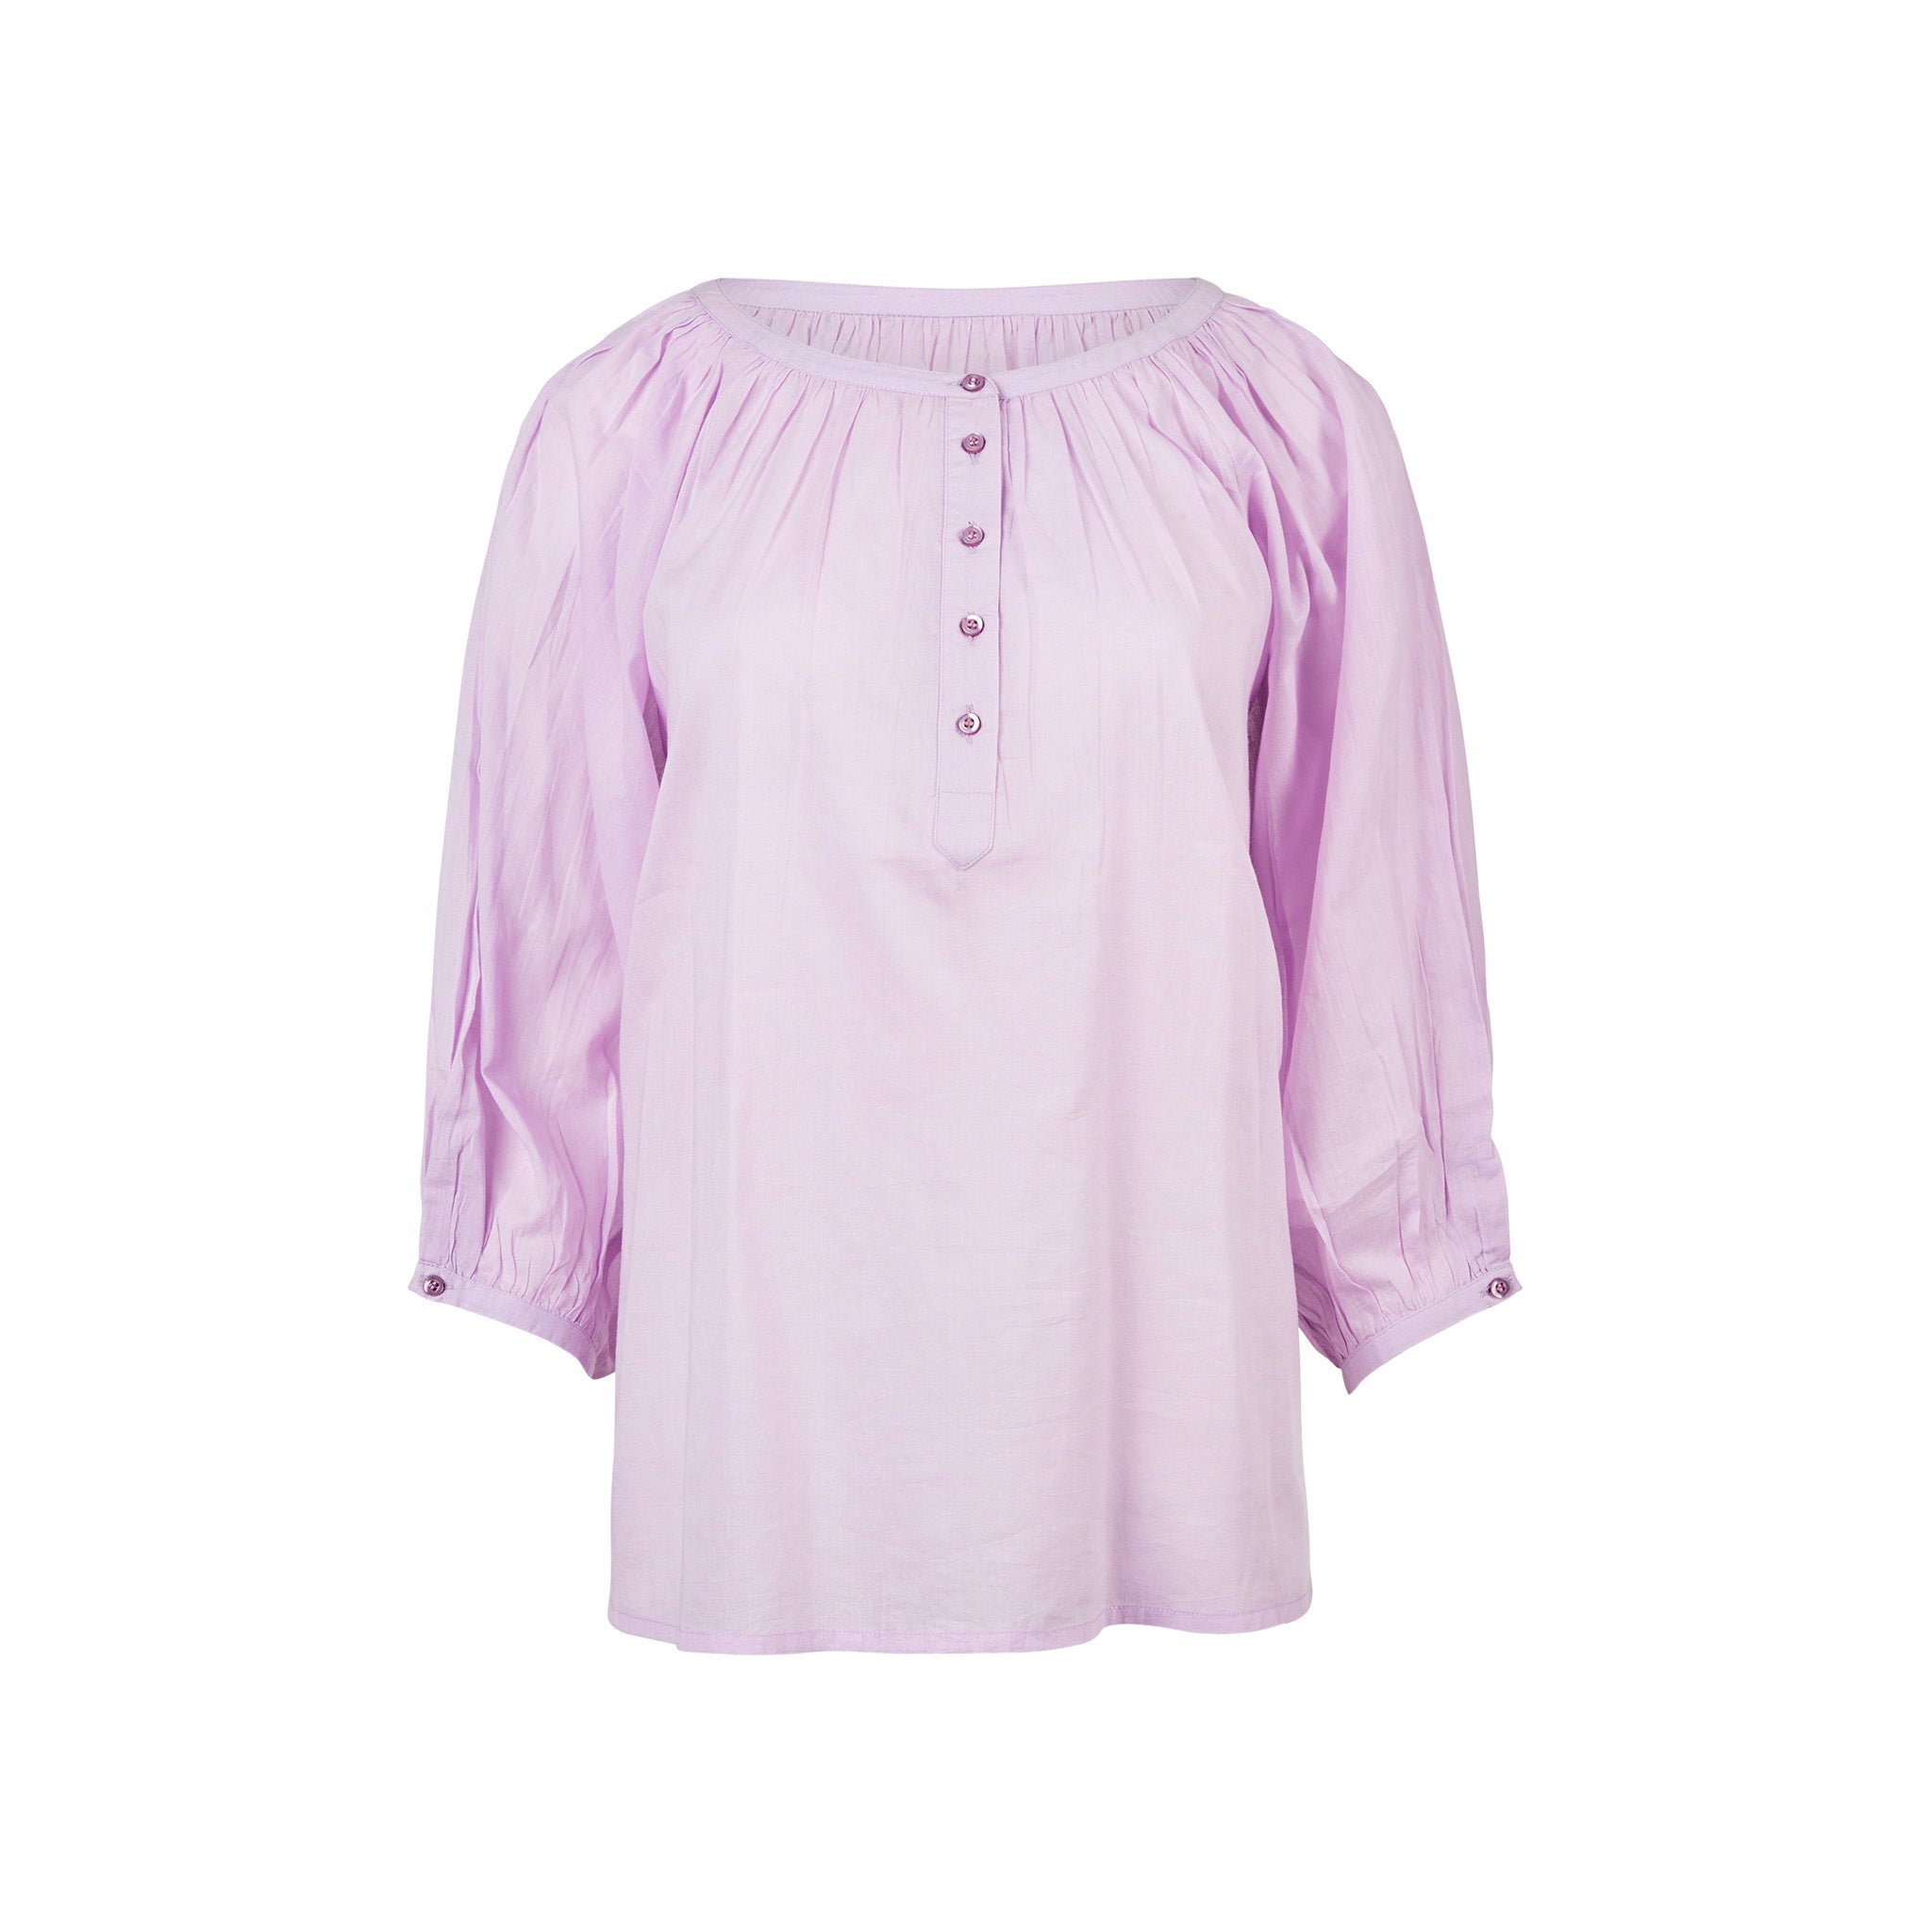 Chemise blouse in Lilac